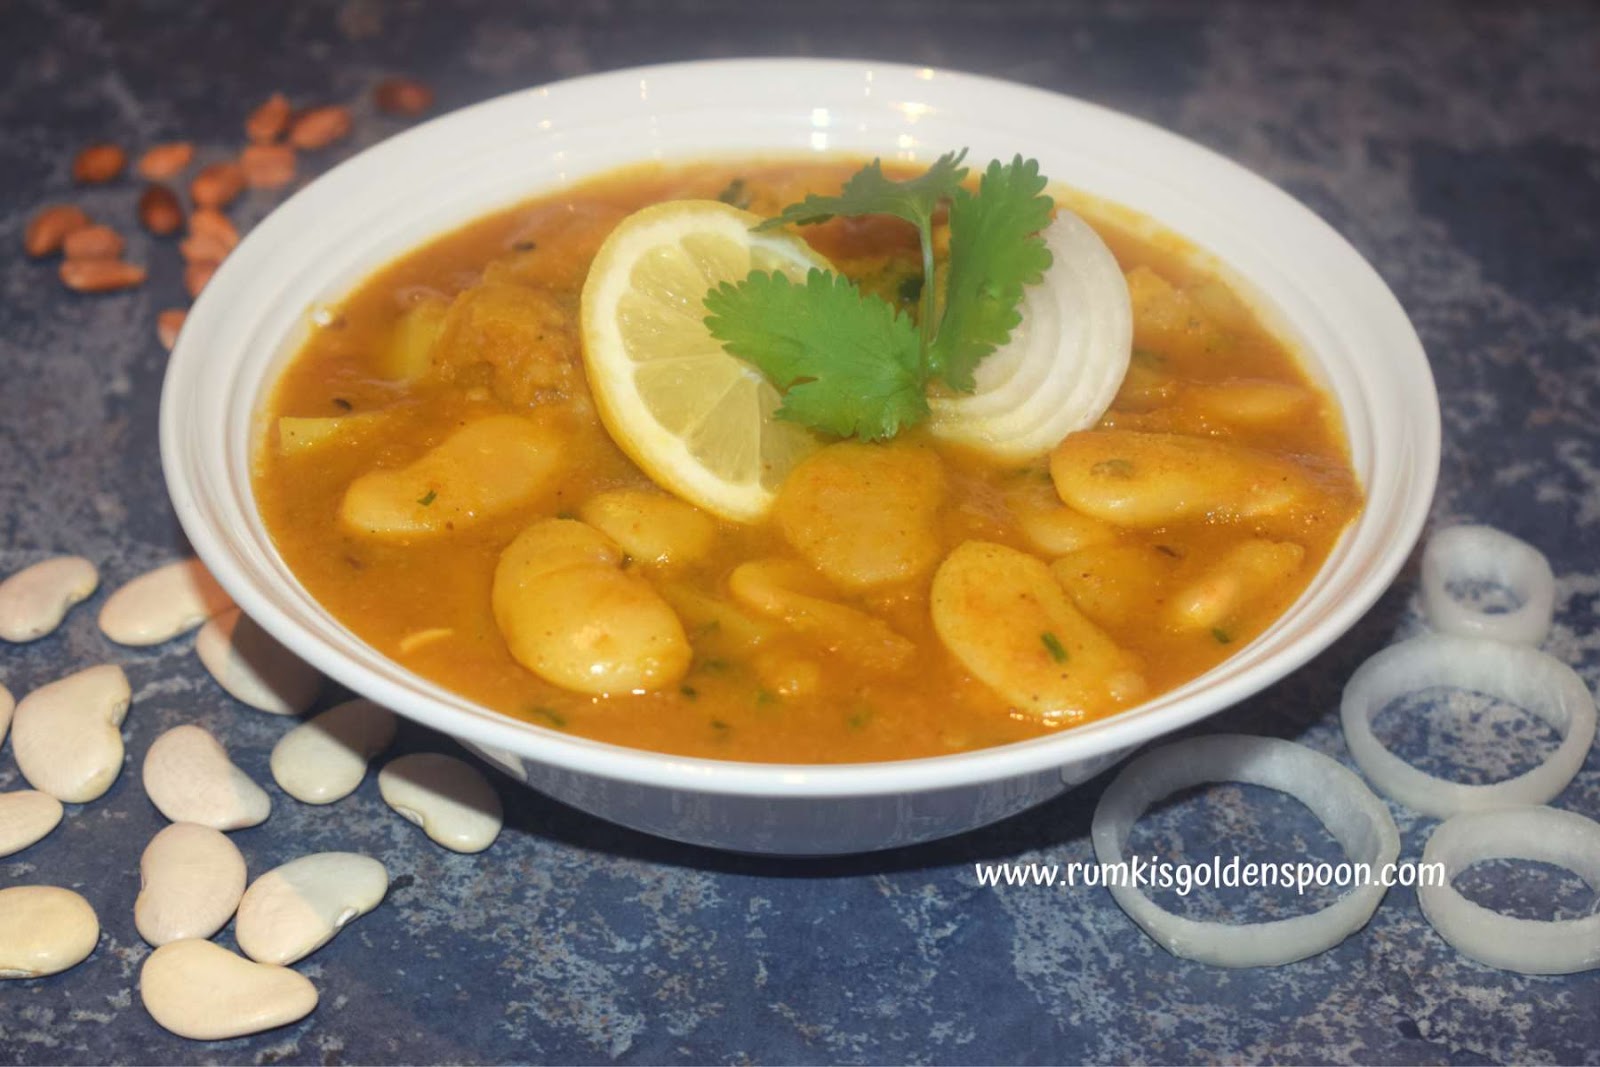 Indian recipe, Vegetarian, Vegan, Spicy Butter Beans Curry, Rajma, Rumki's Golden Spoon, Masala Curry, Quick and Easy